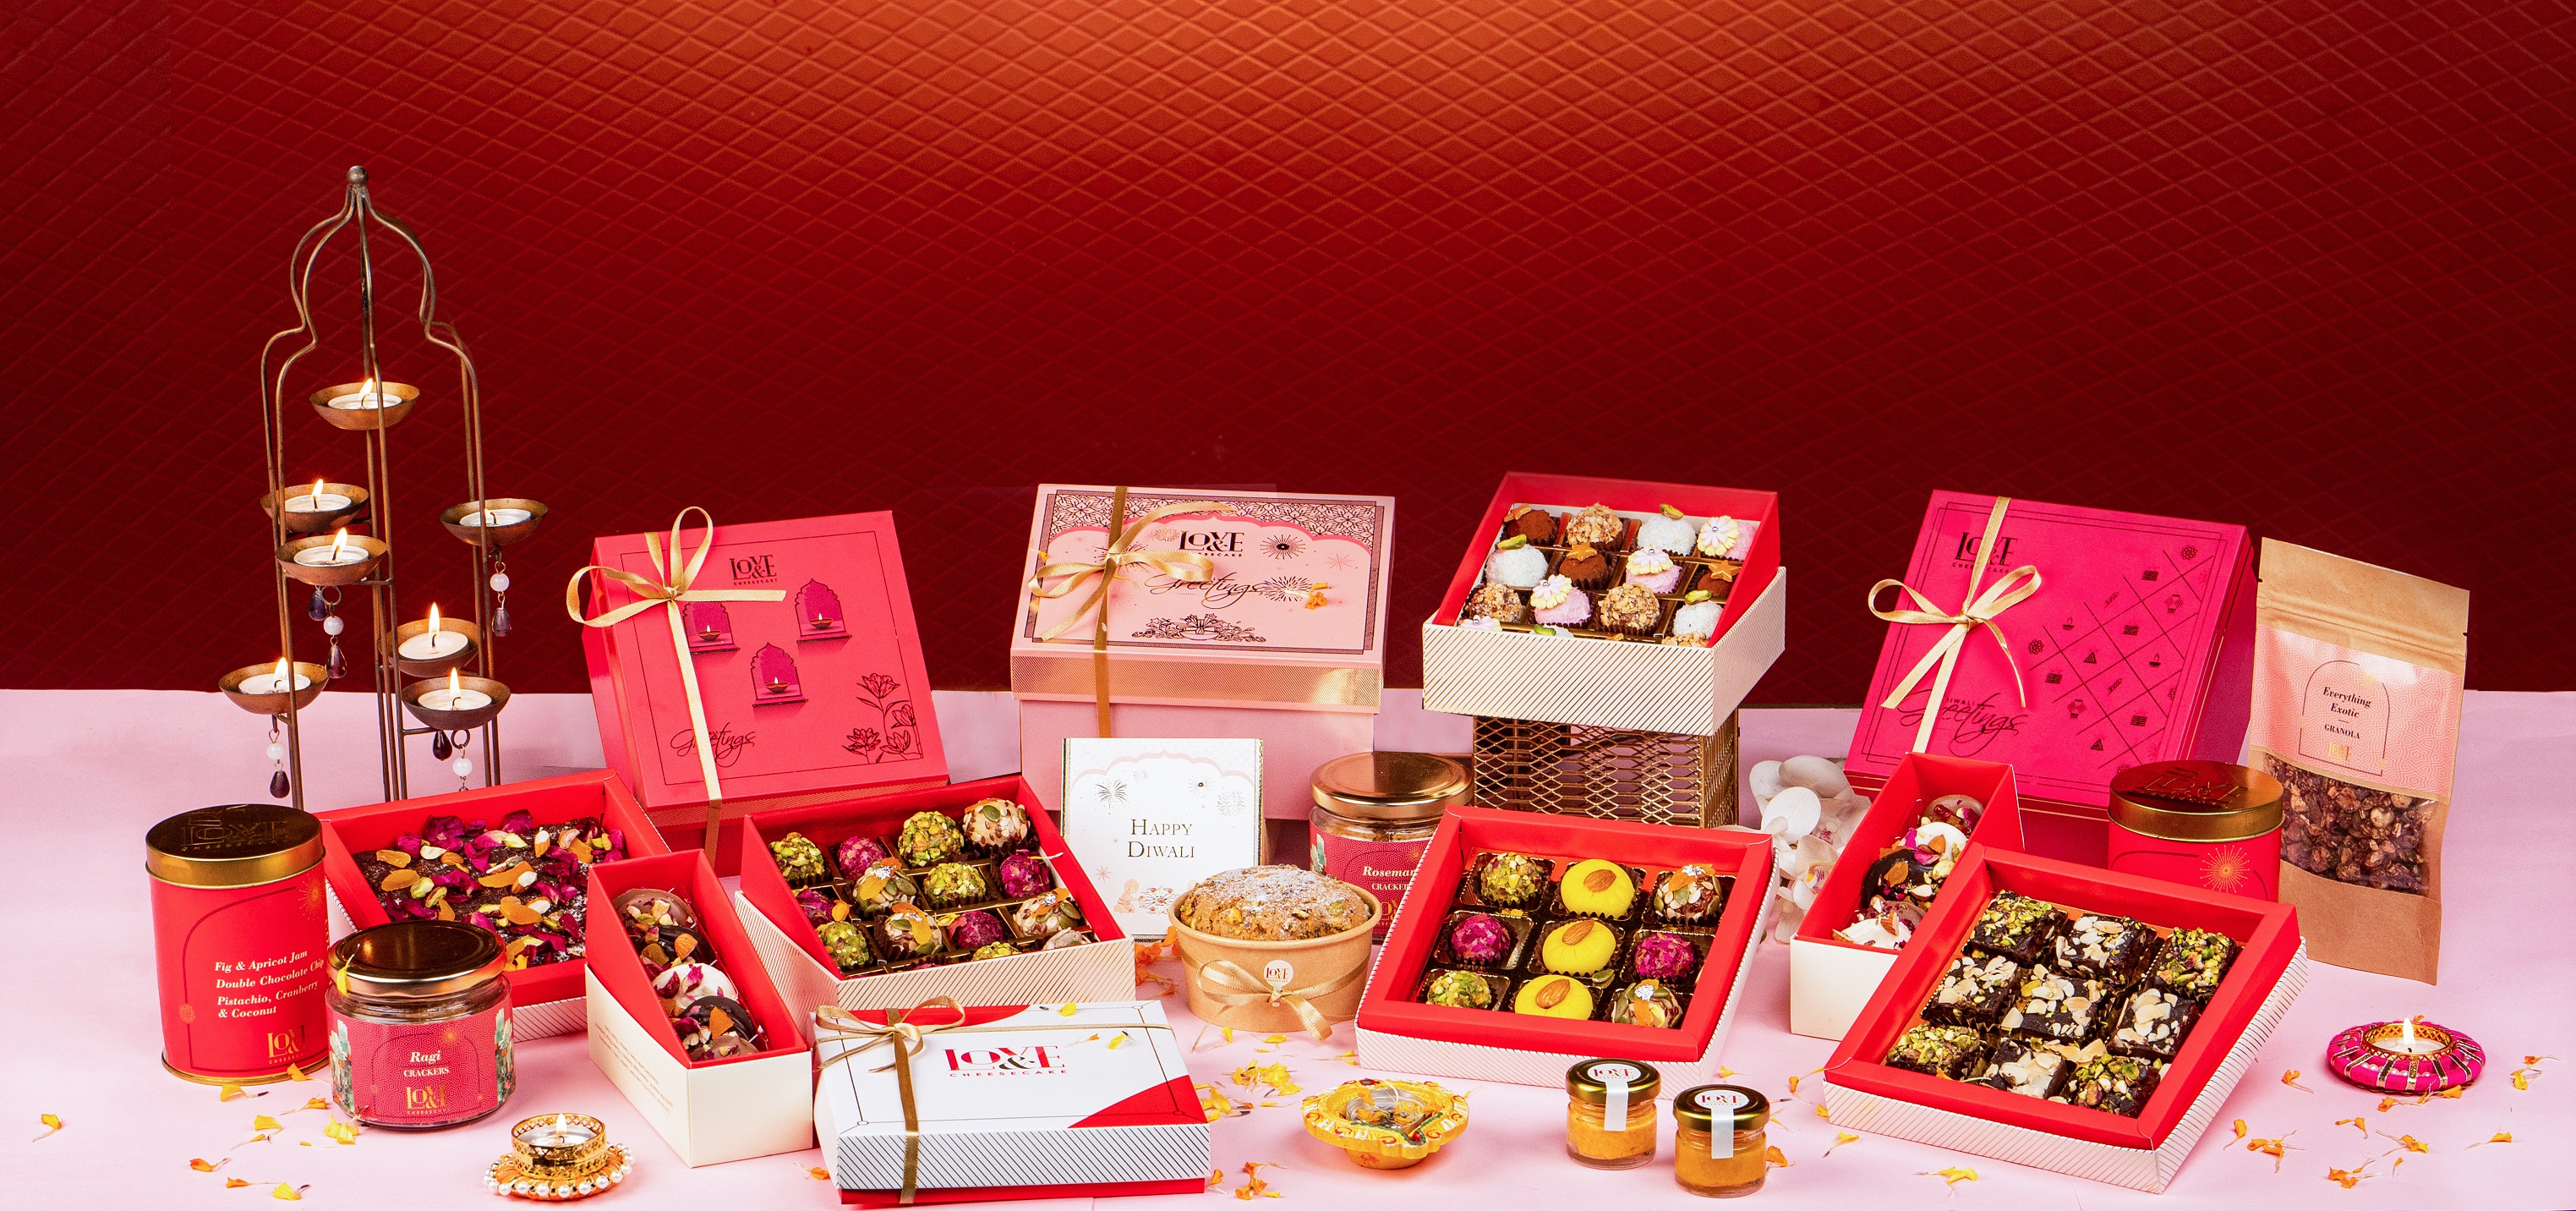  Celebrate A ‘Sweet’ Diwali With The Love & Light Collection By Love & Cheesecake